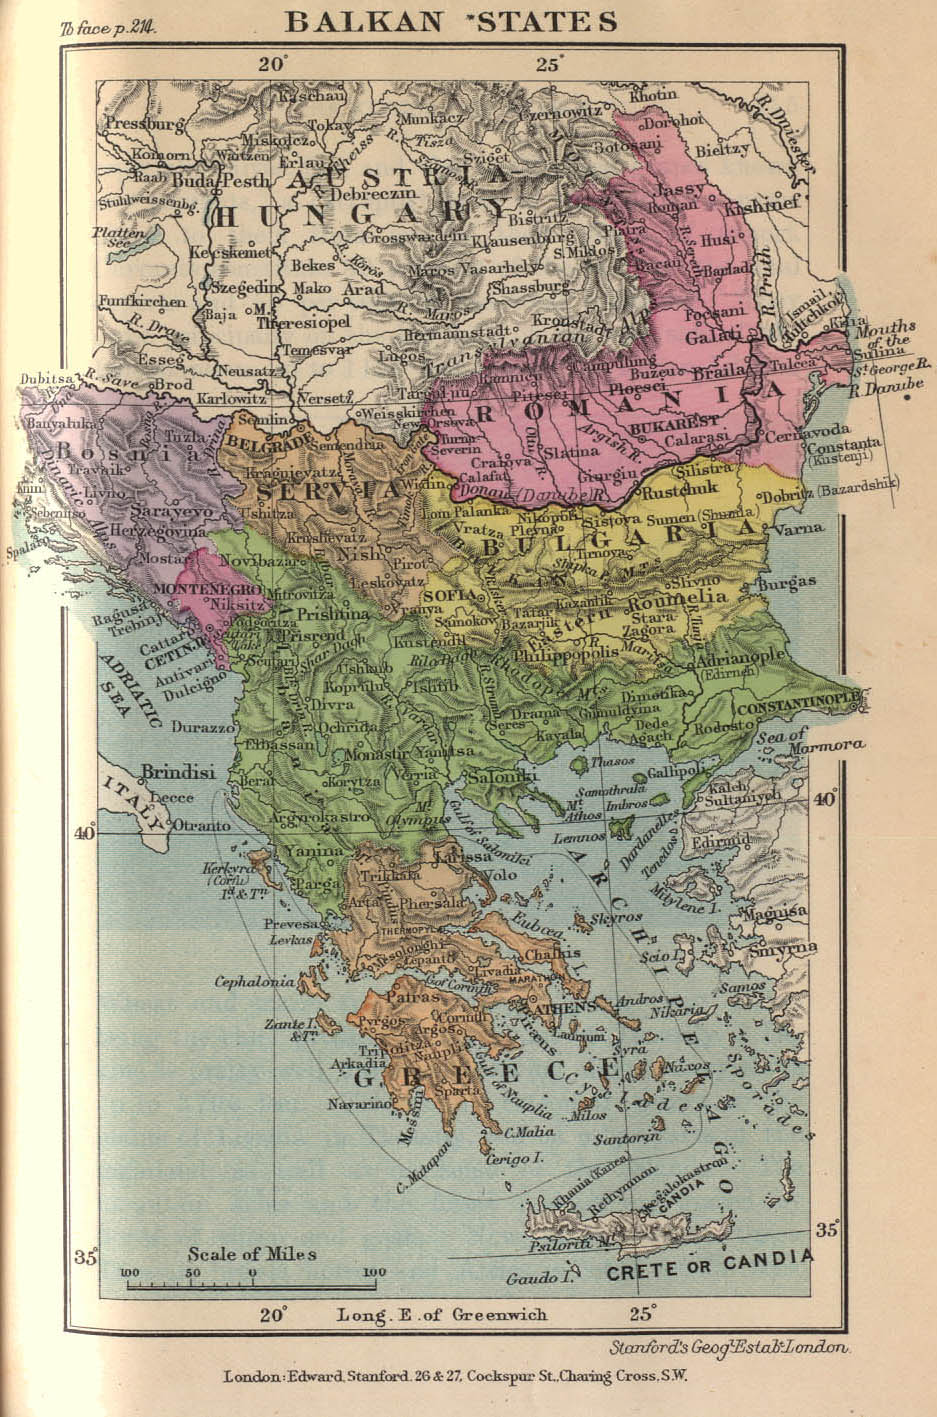 Historical Map of Balkans. Balkan States 1899 (304K) Map from "Stanford's Compendium of Geography and Travel: Europe" Volume 1, 1899. 